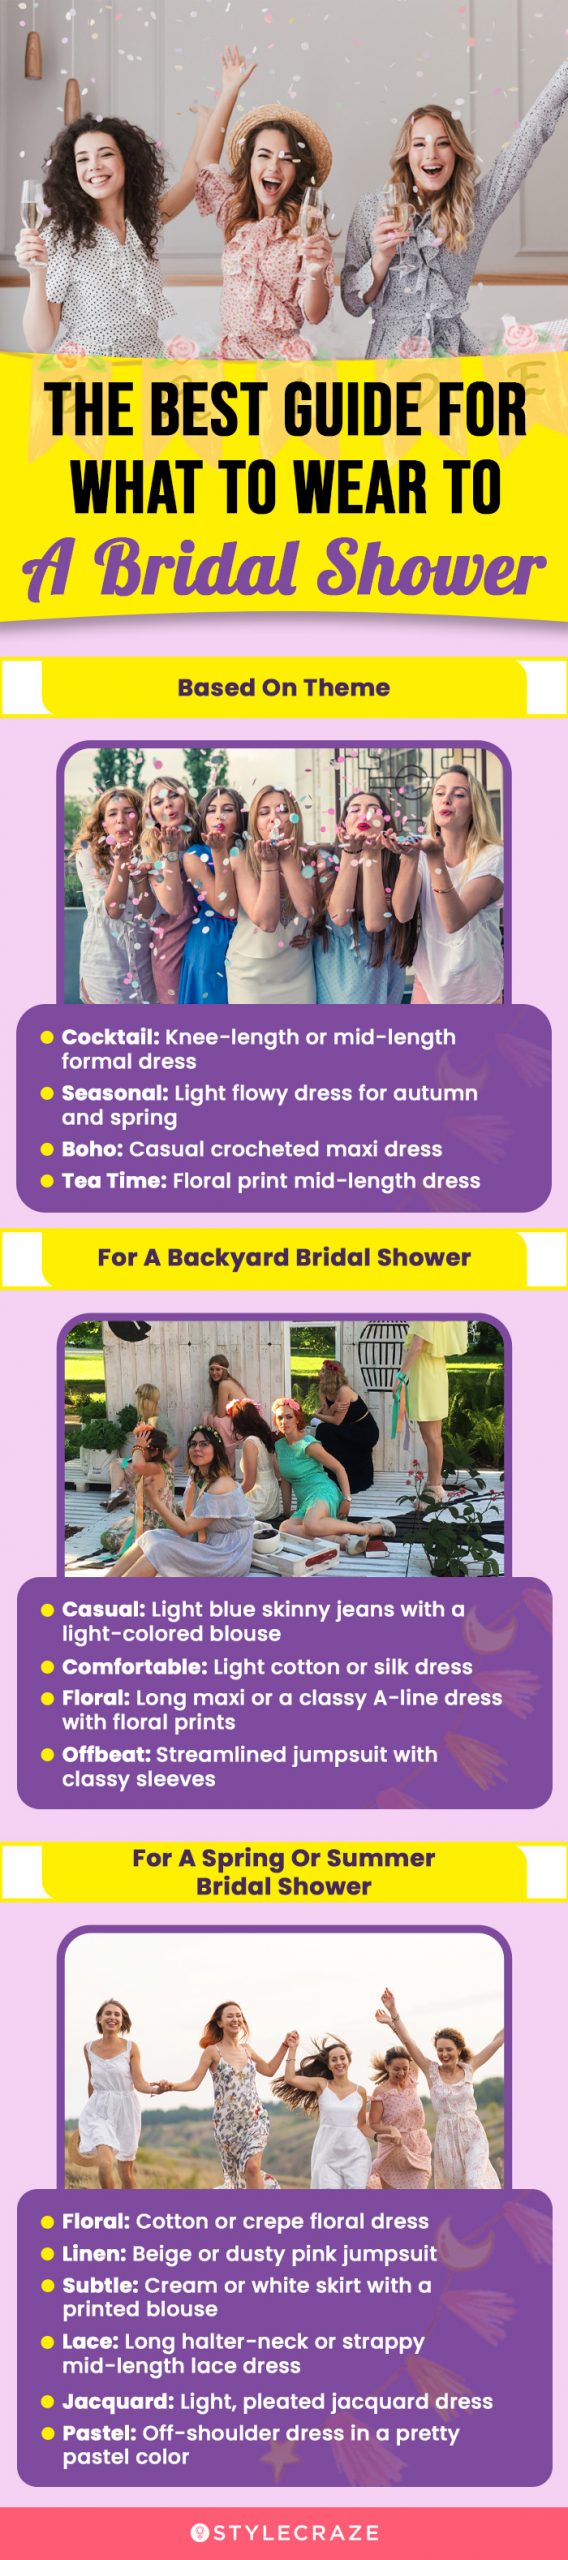 the best guide for what to wear to a bridal shower [infographic]